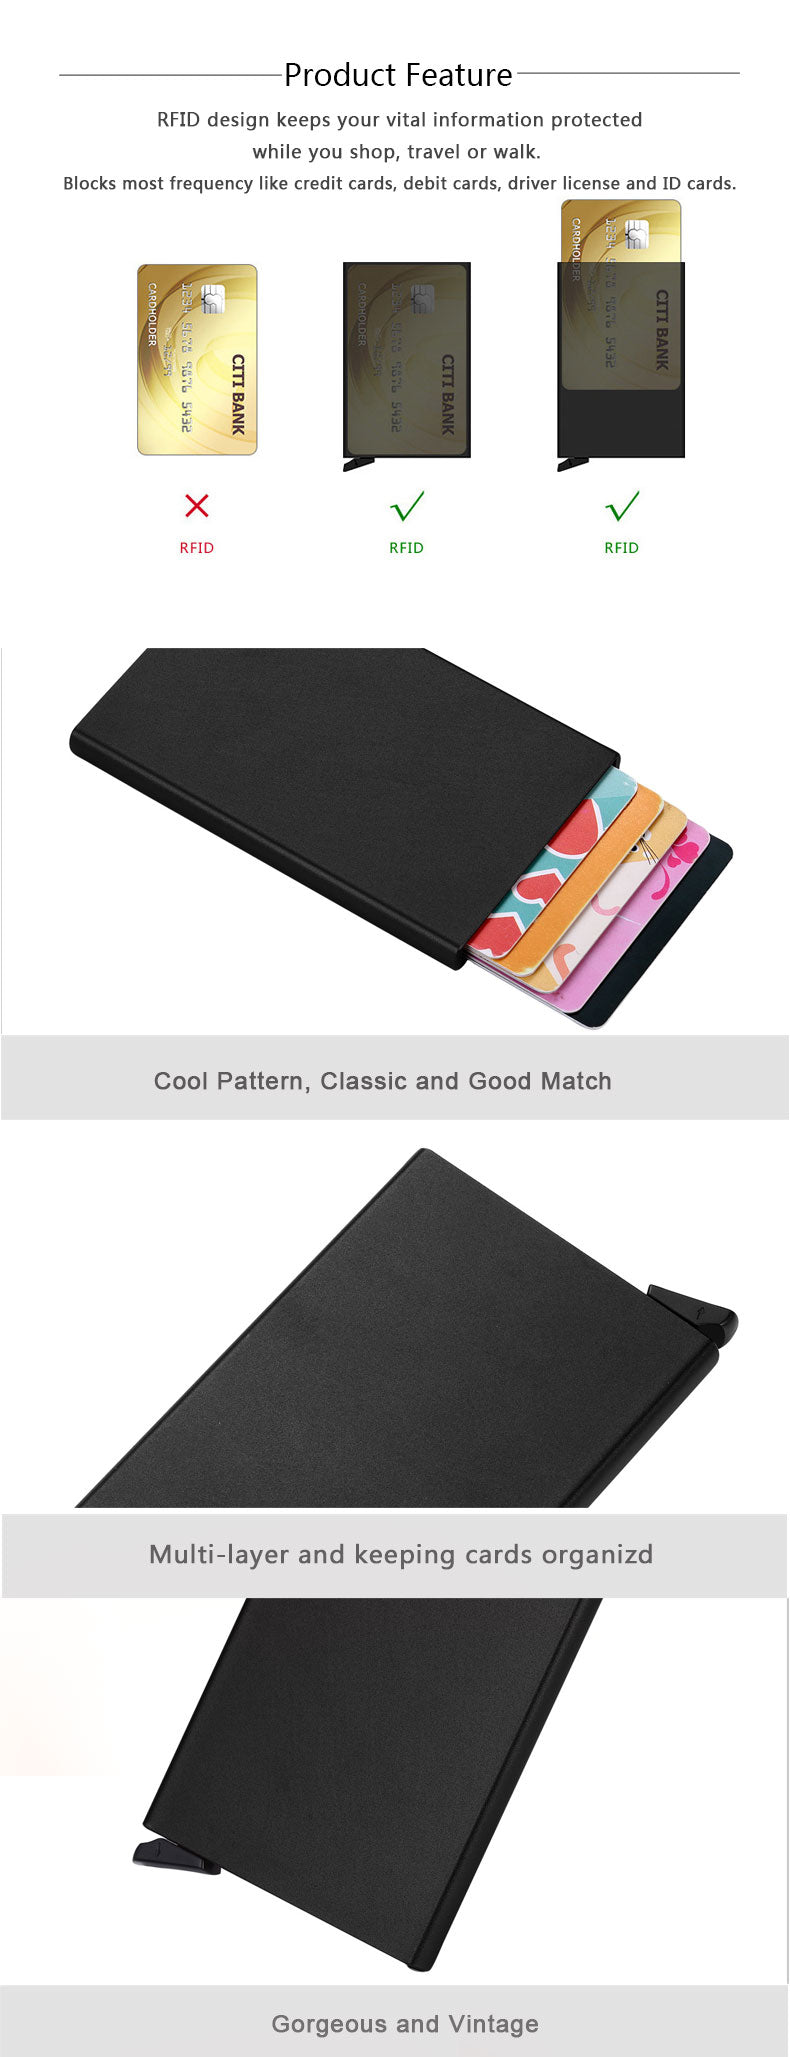 Personalized RFID Blocking Business Card, Debit Card, cum Credit Card Holder - For Corporate Gifting, Event Gifting, Freebies, Promotions JAST001BK